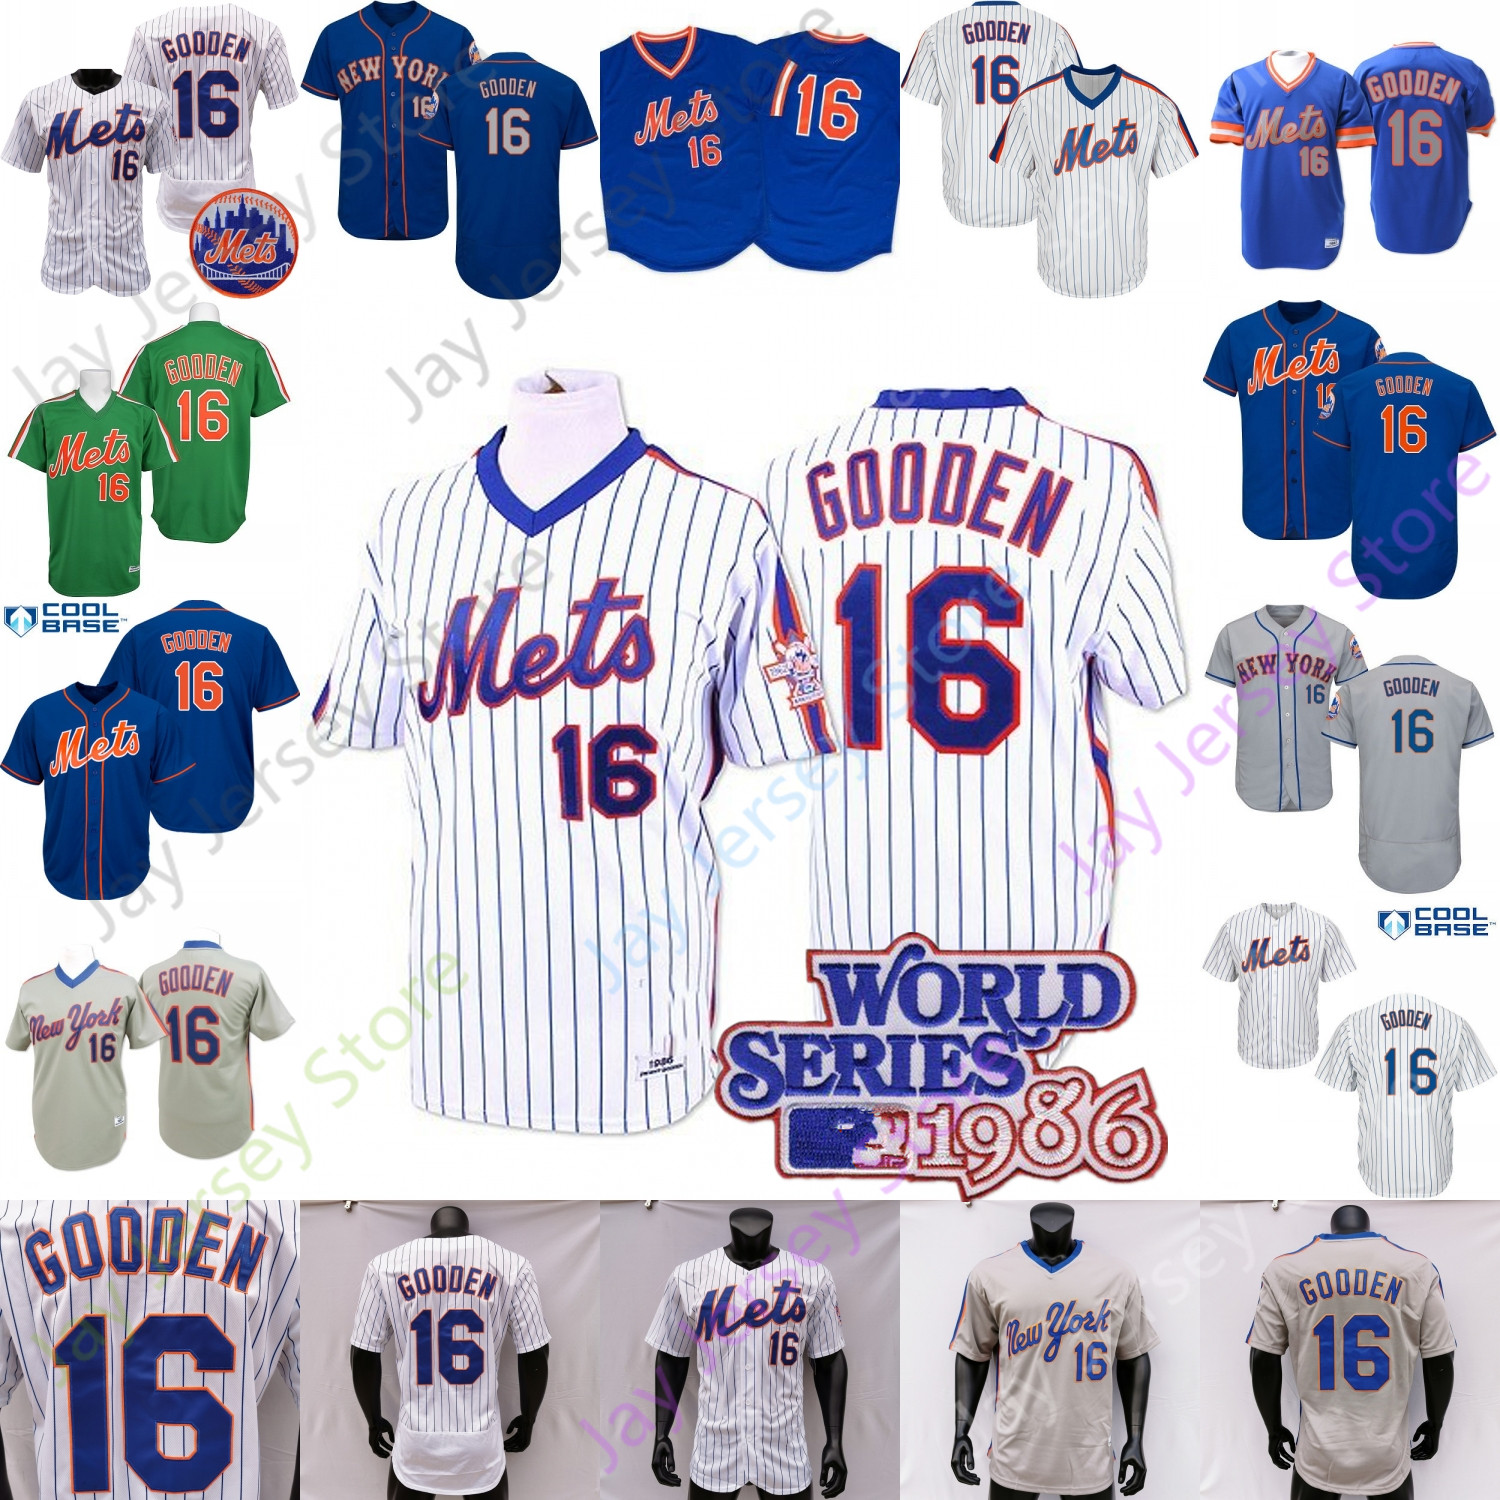 Dwight Gooden Jersey 1986 WS 25TH Patch Salute to Service Green MN Blue Grey Orange Fans Player Mesh BP Vintage Pinstripe Pullover Size S-3XL от DHgate WW